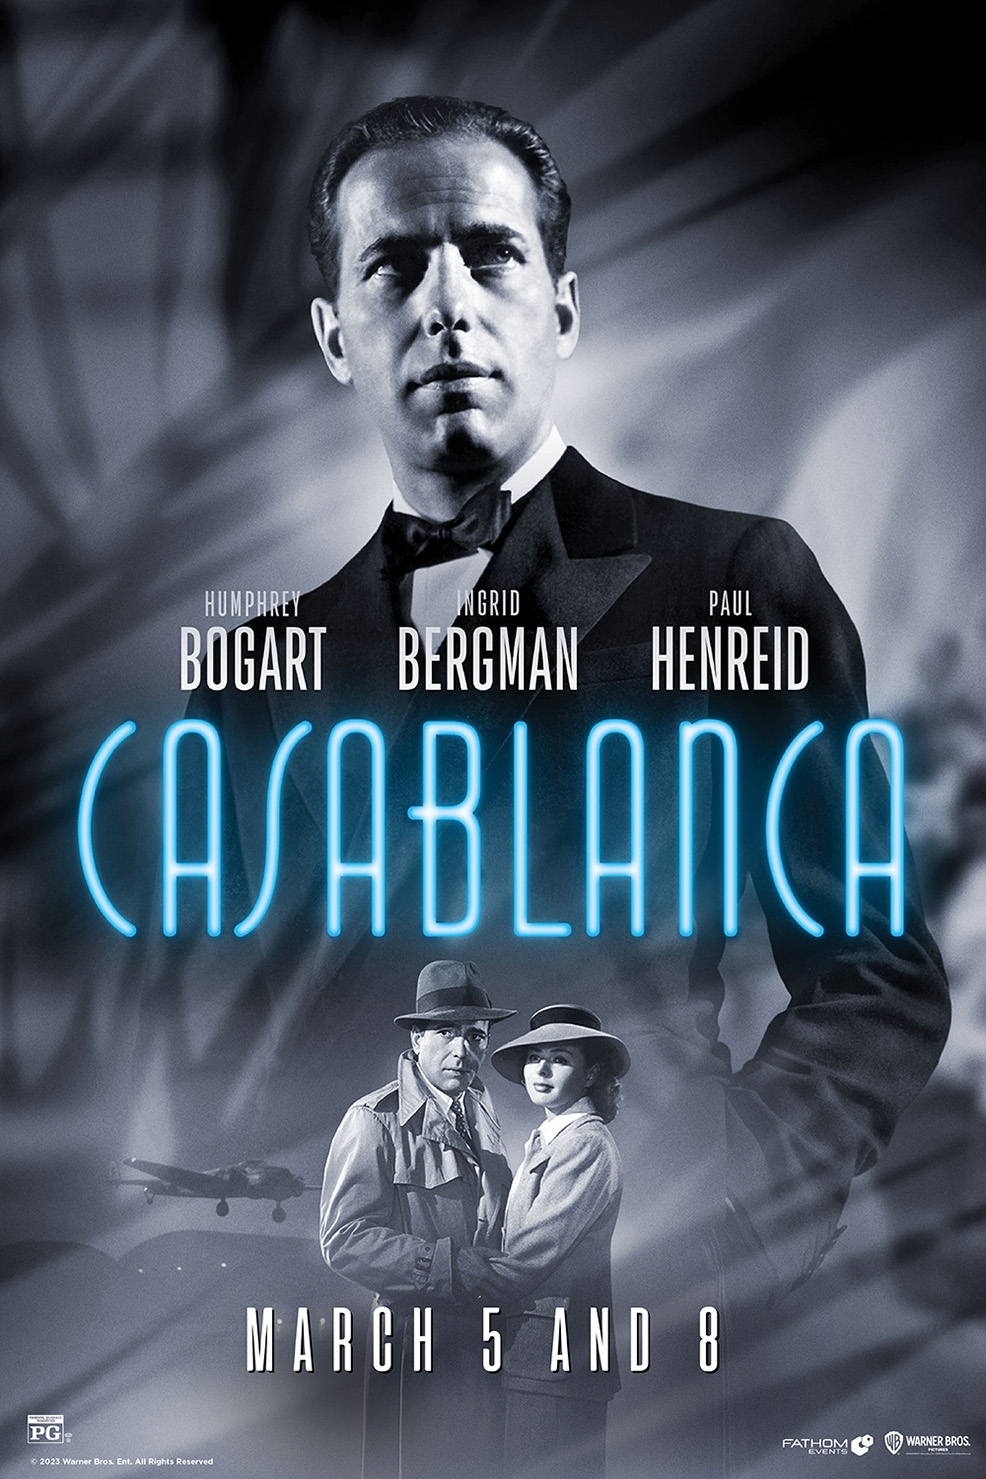 Poster of Casablanca presented by TCM